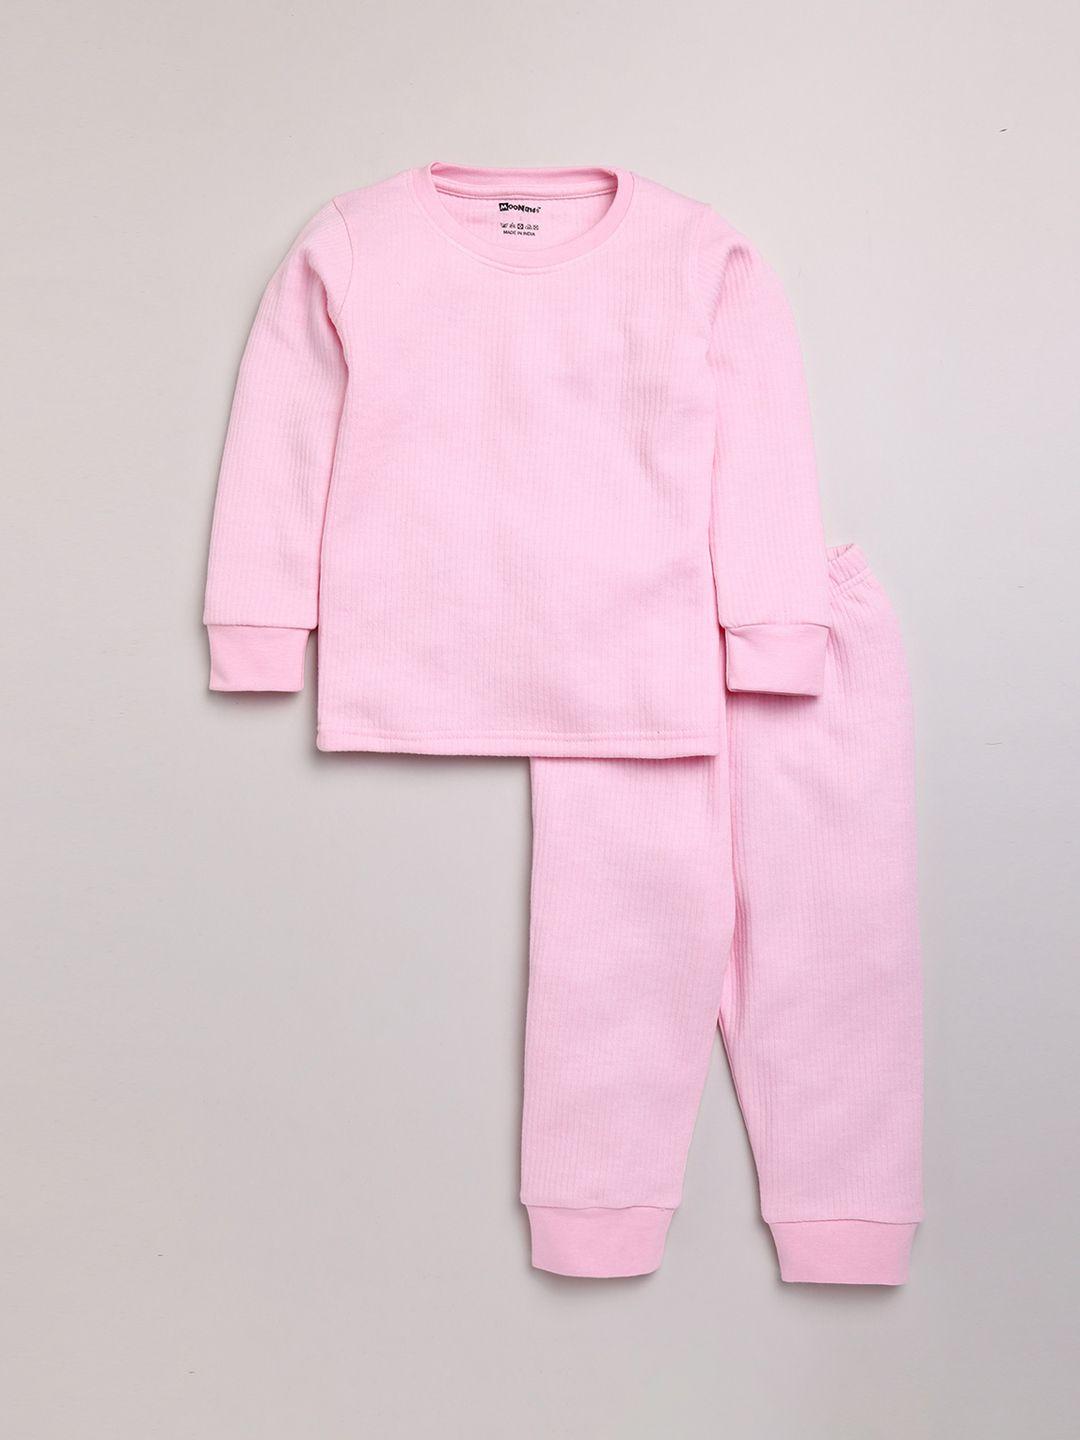 moonkids cotton blend solid thermal sets for kids